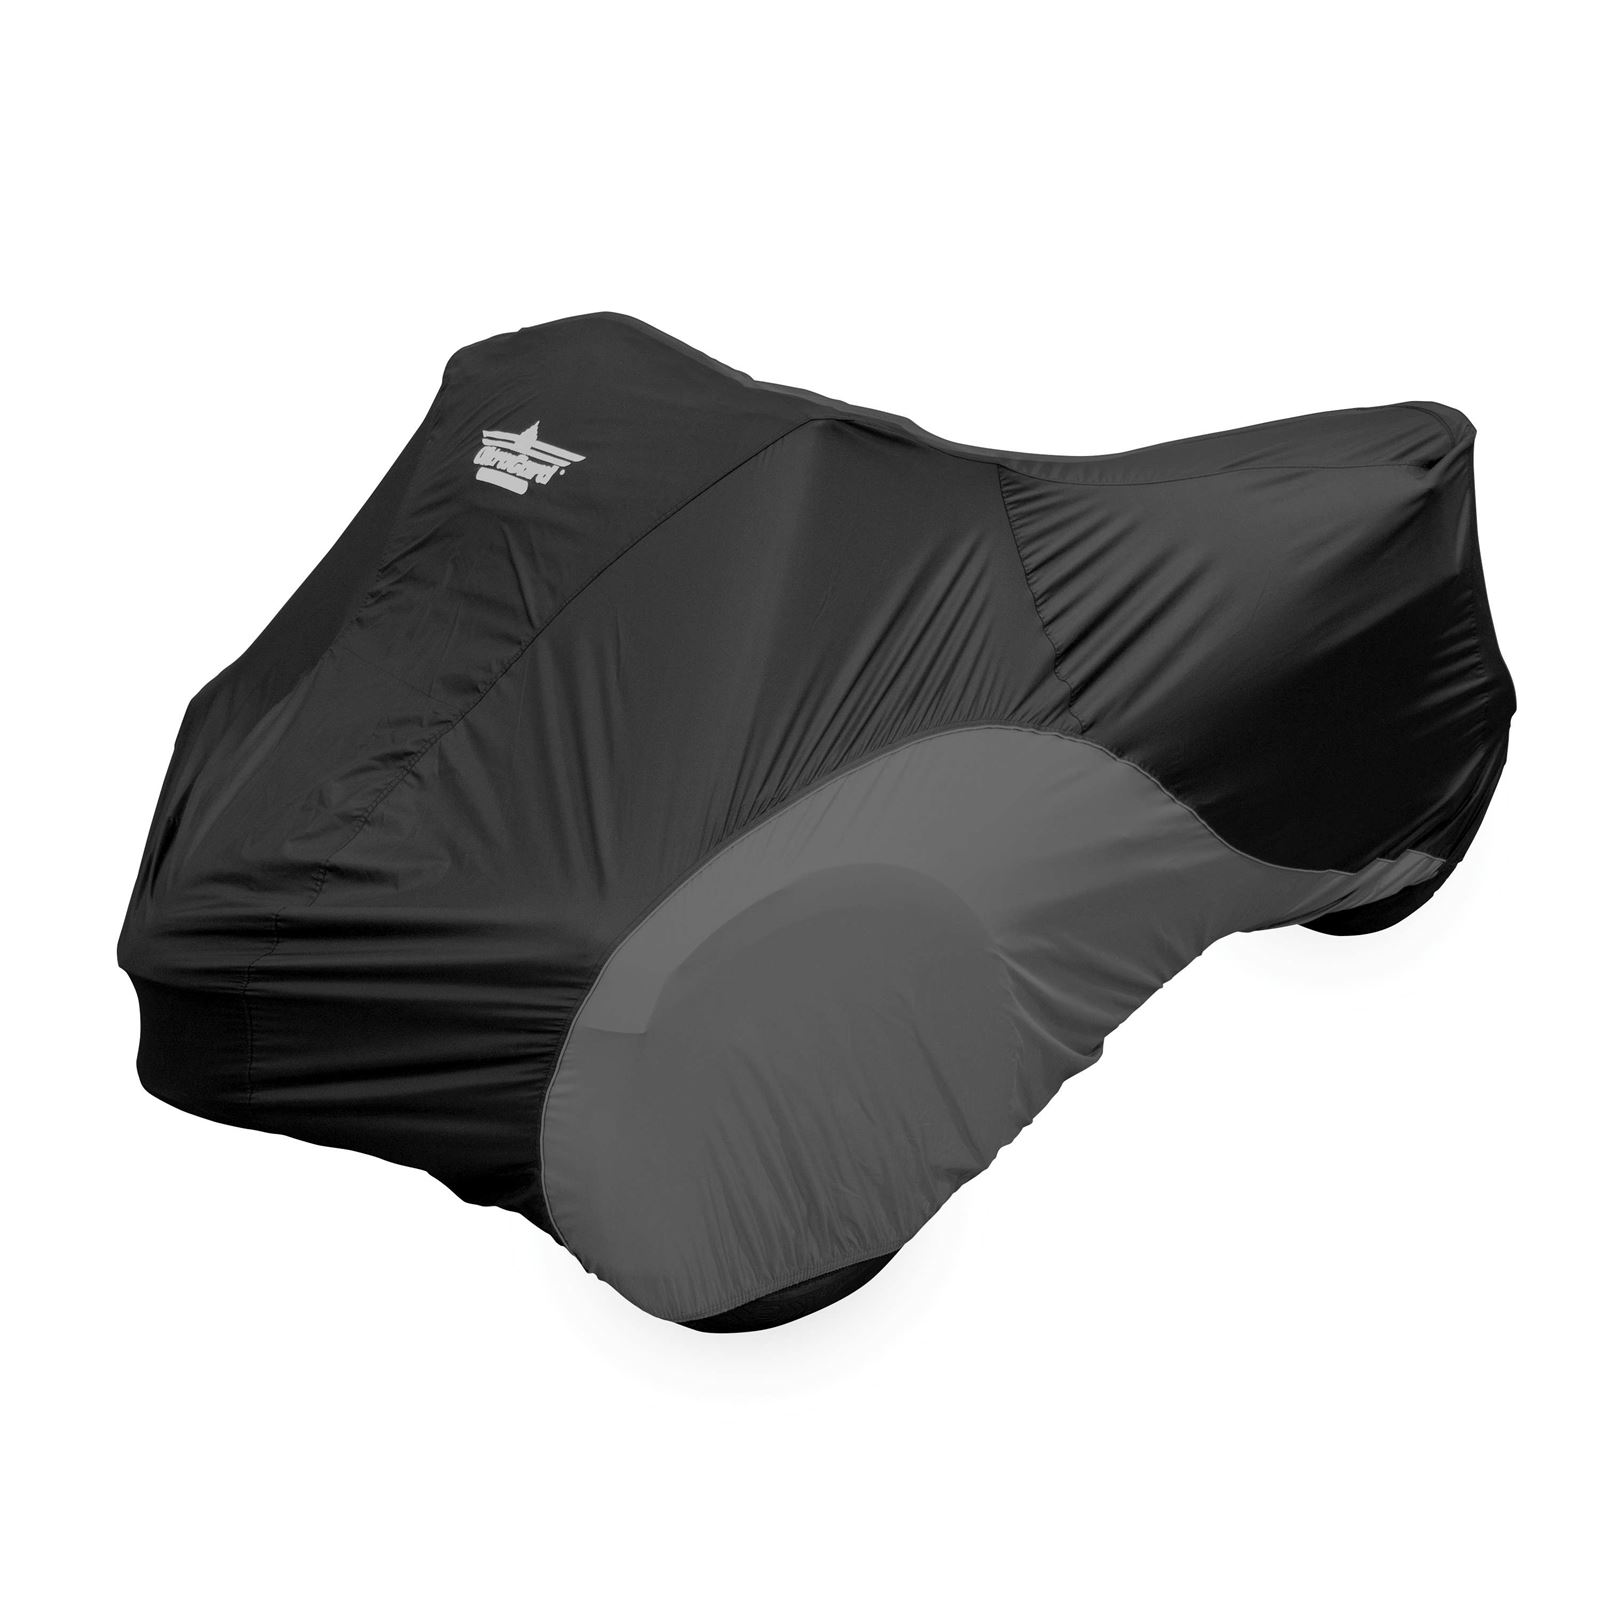 Ultragard Deluxe Trike Cover Can-Am, Black/Charcoal